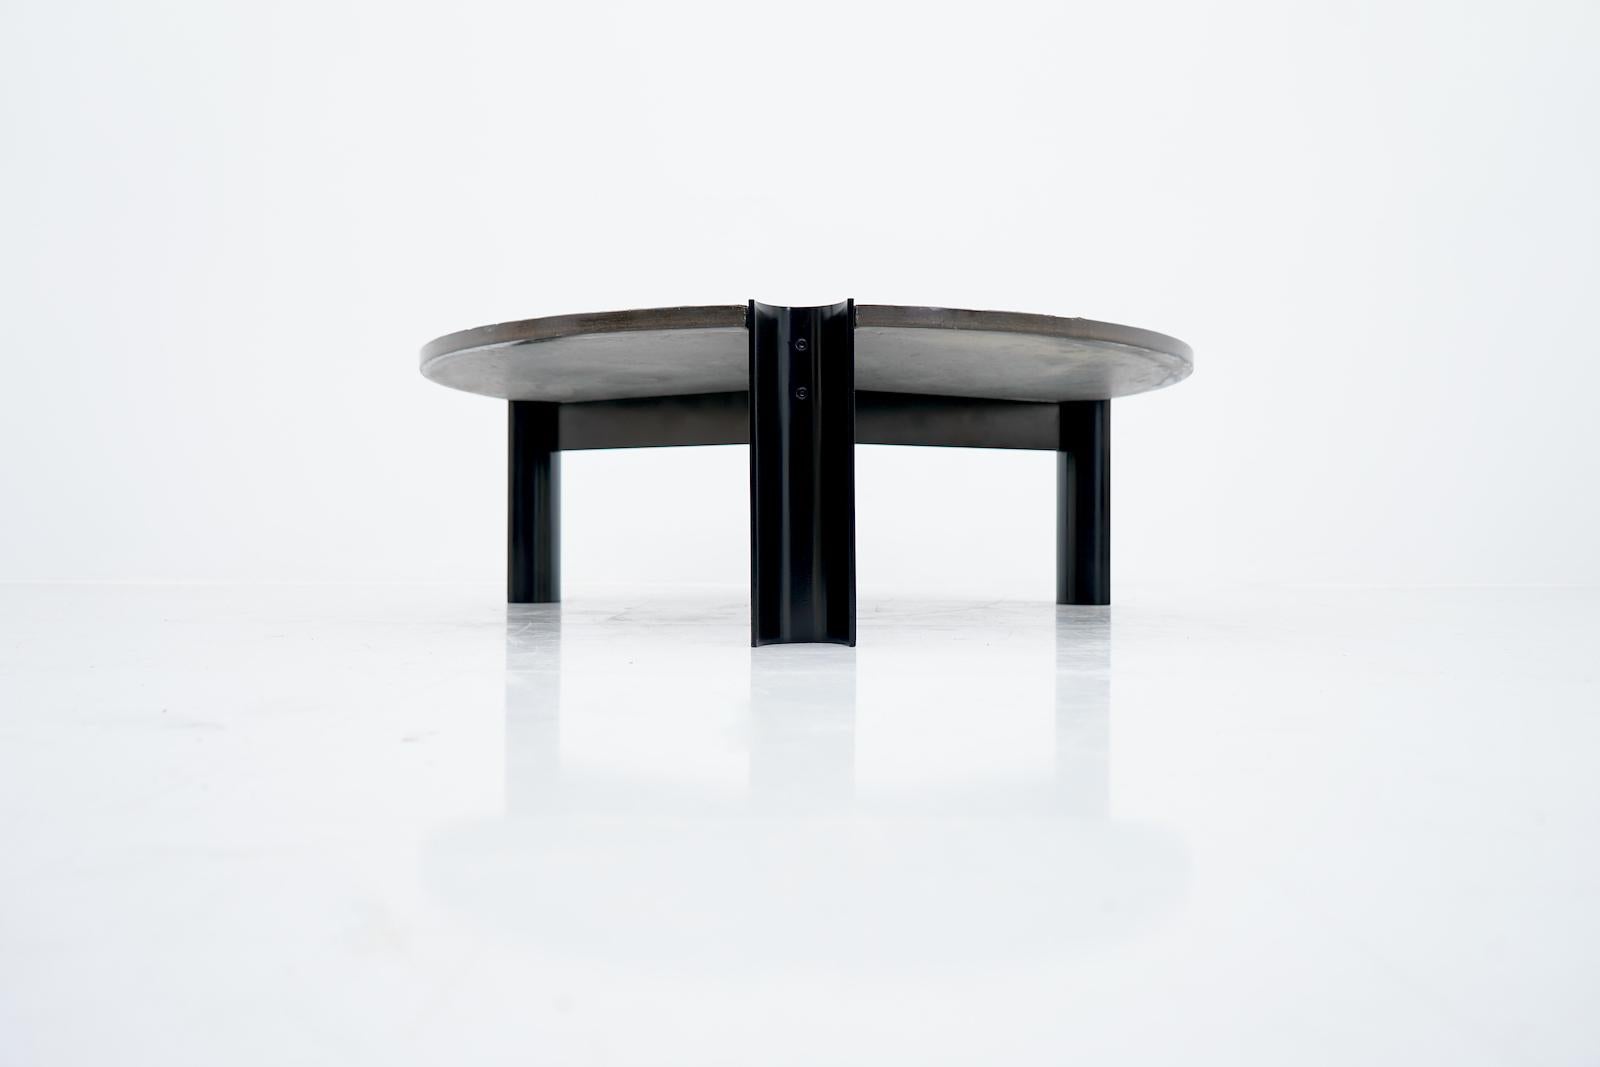 A black beauty circulate slate and metal coffee table. The tables comes from the 1970s. Overall in good condition with a great look. With small signs of usage.
Dimensions: Height: 15.74 in. (40 cm) diameter: 47.24 in. (120 cm).